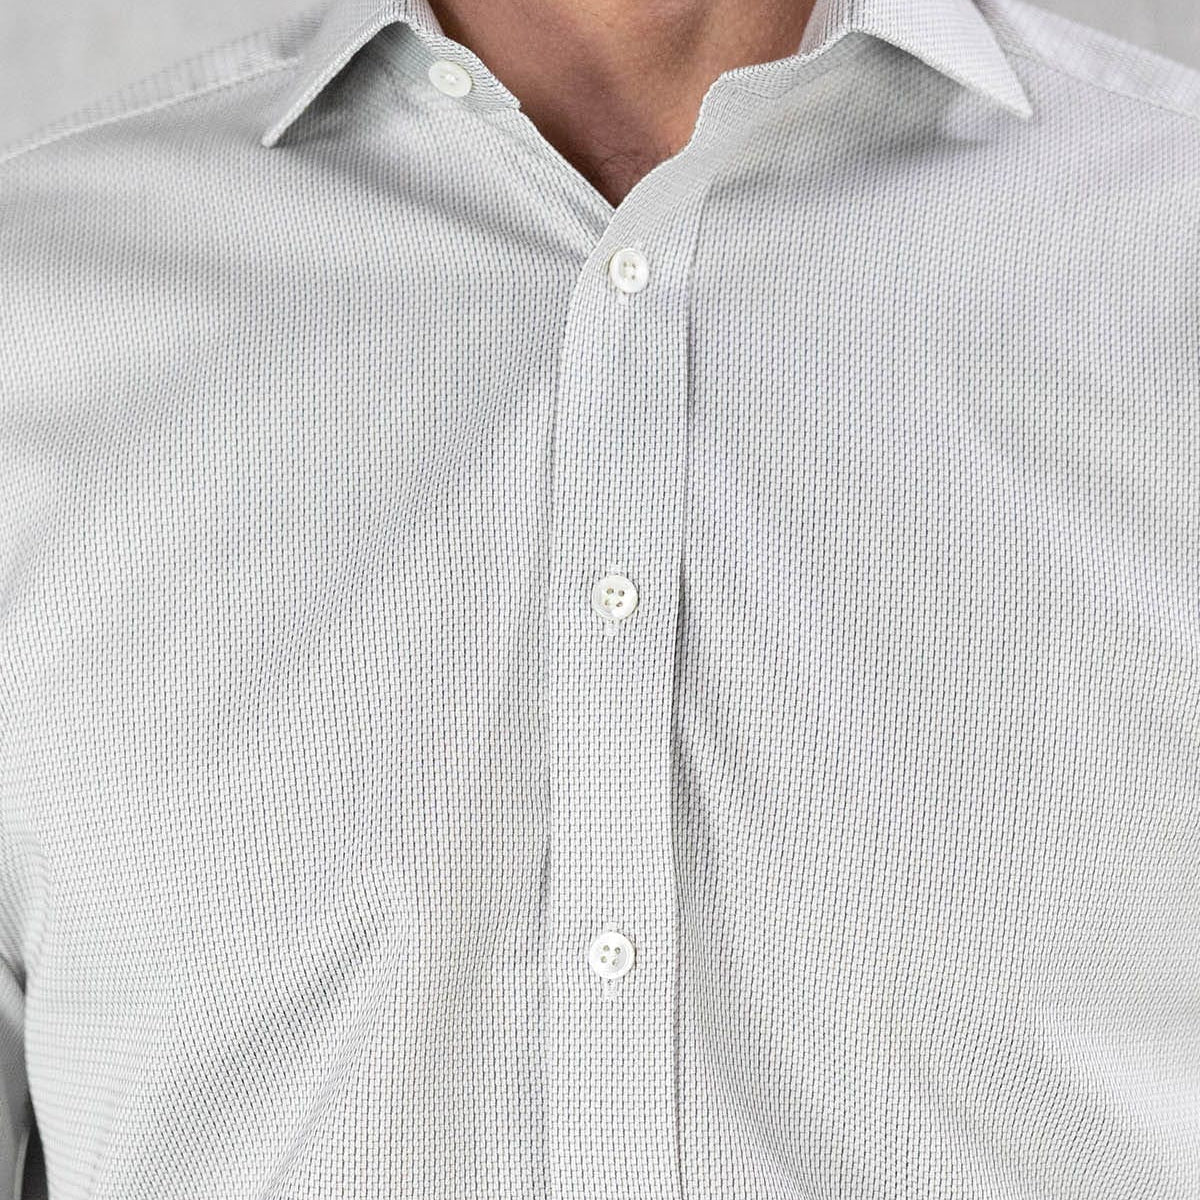 Contemporary Fit, Cut-away Collar, 2 Button Cuff Shirt in a Brown, Navy & White Textured Twill Cotton